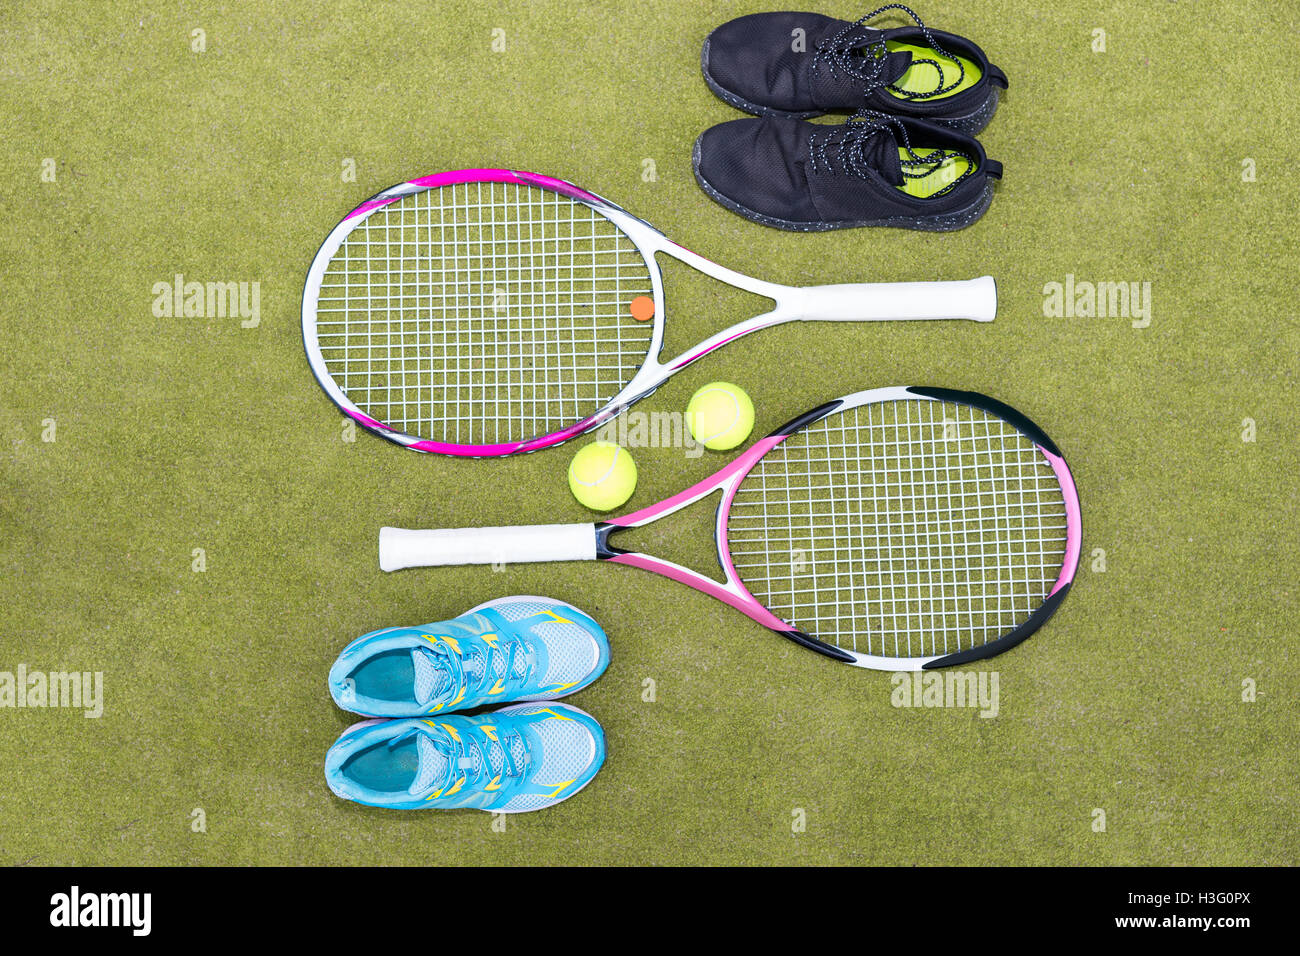 Tennis equipment set of two tennis rackets, two balls, male and female sneakers on green grass court Stock Photo